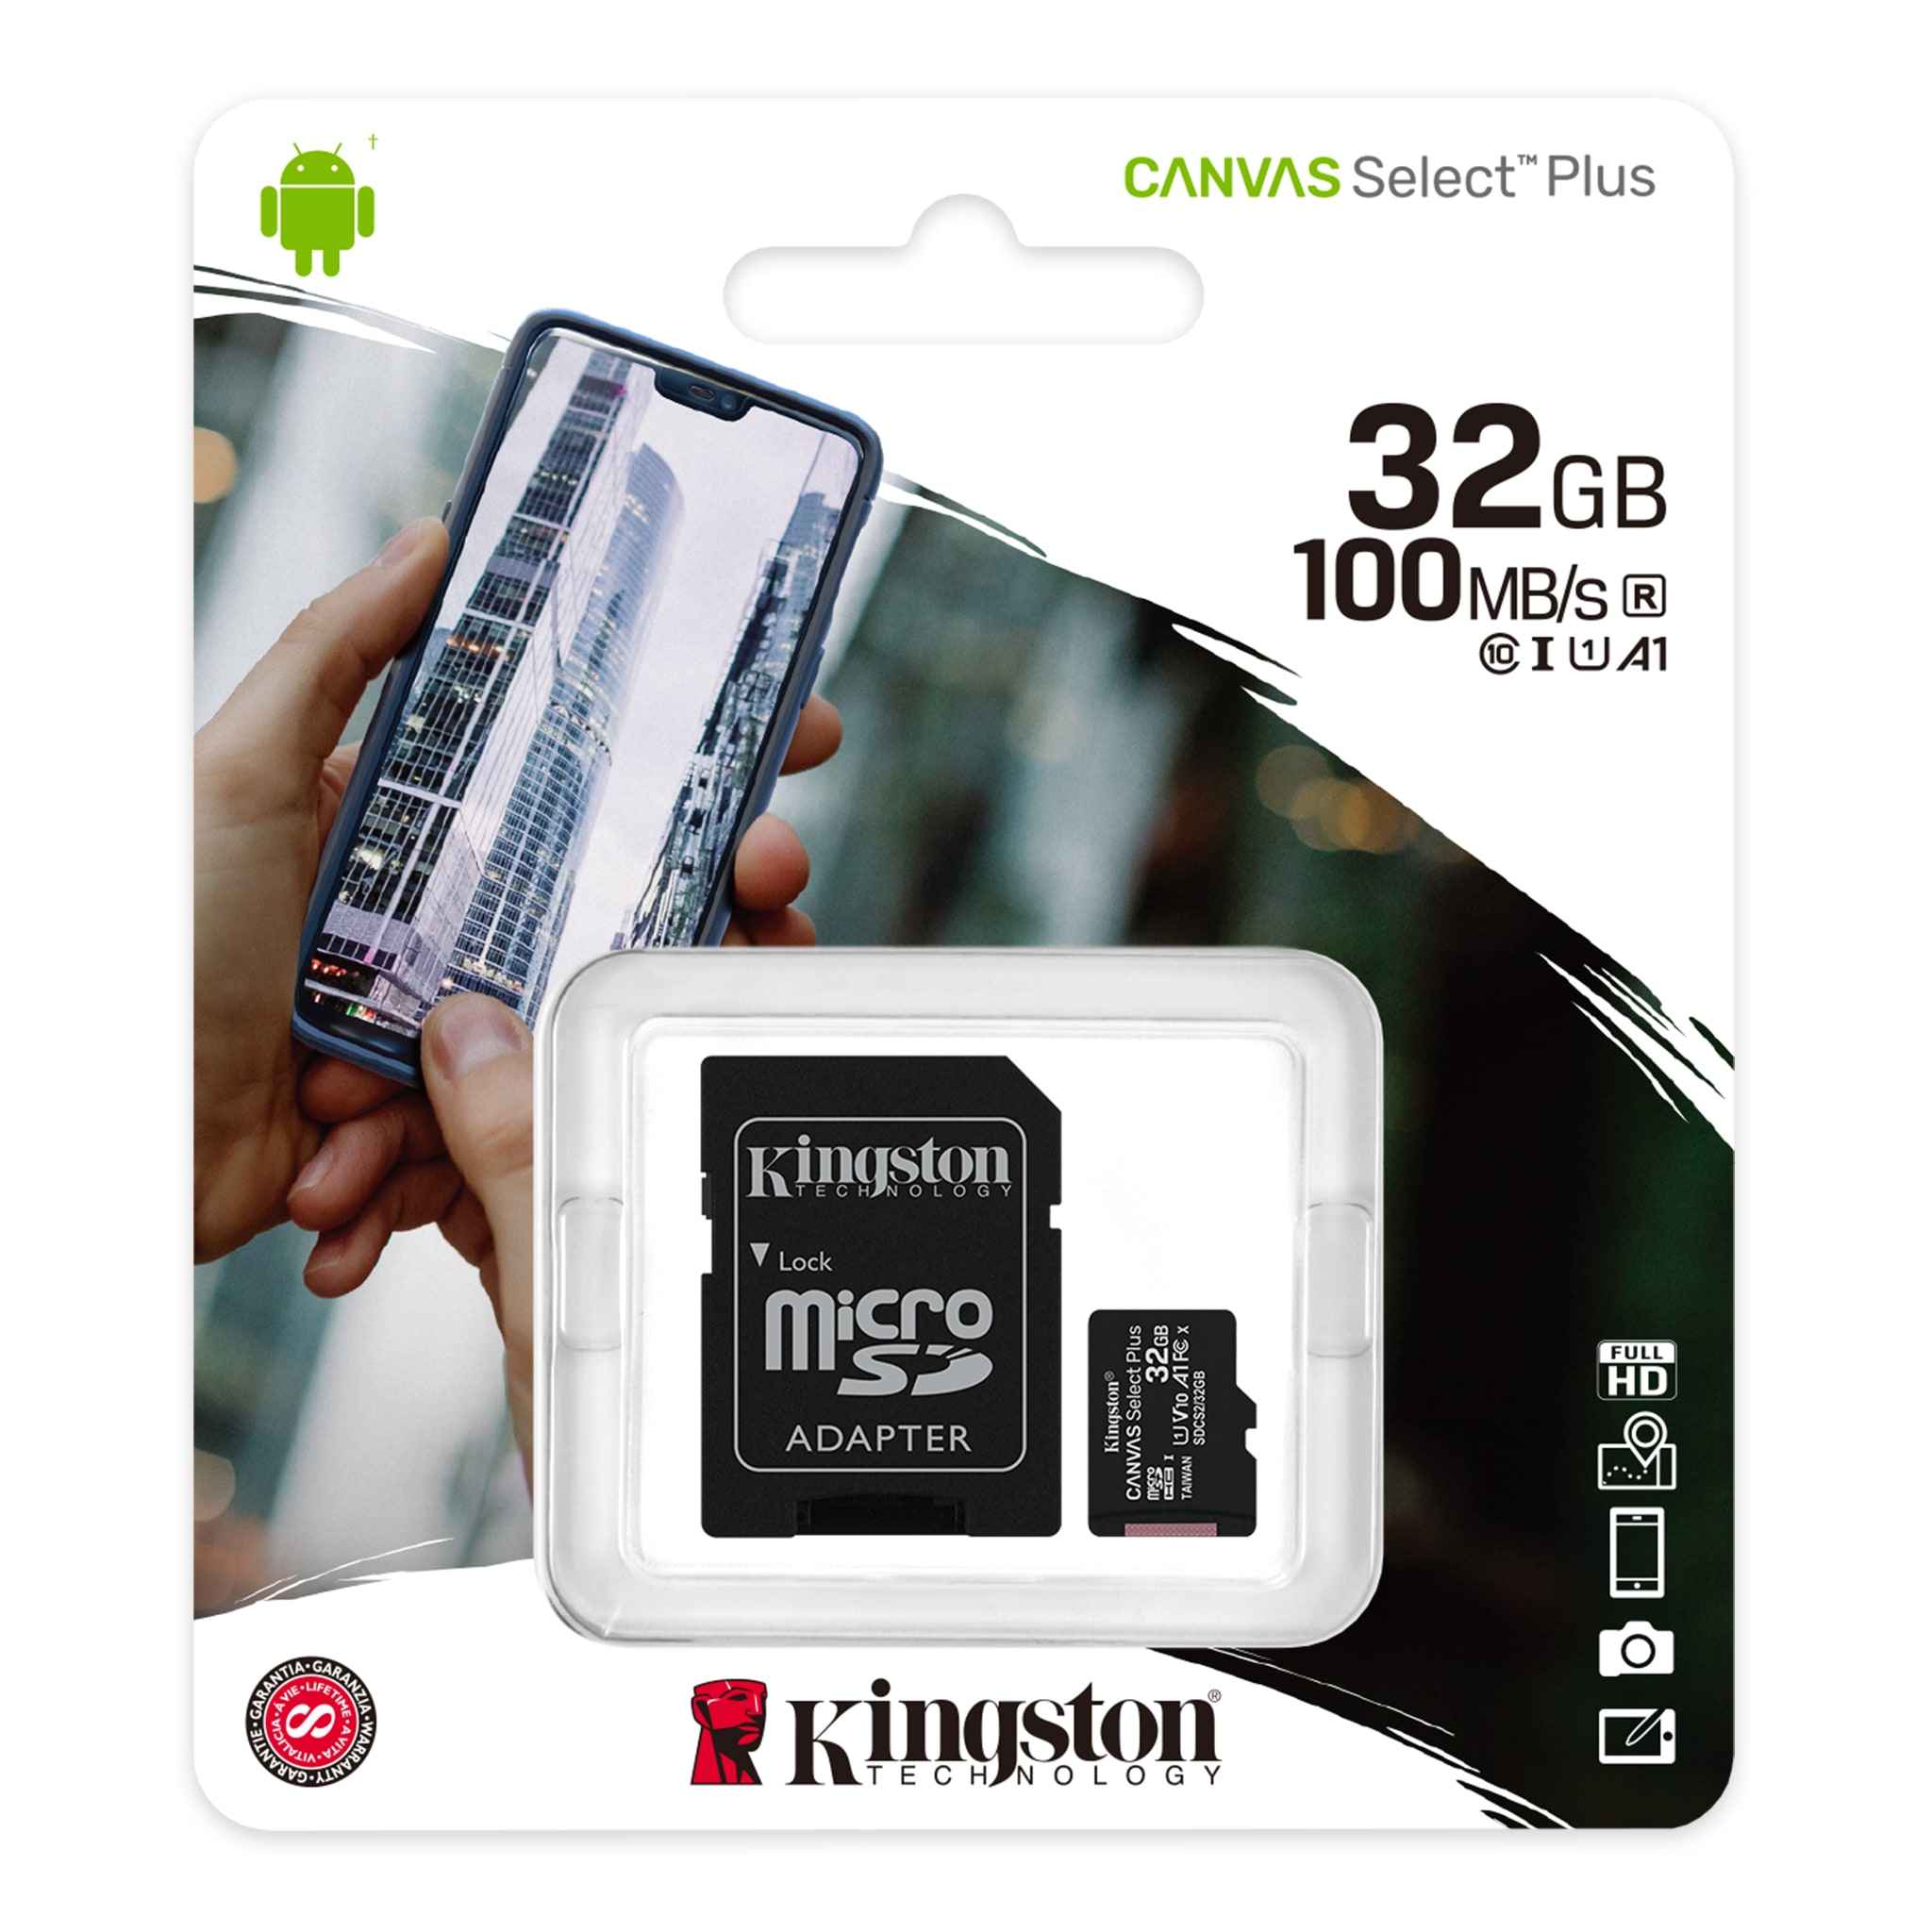 Professional Kingston 4GB MicroSDHC Card for Sony X12 Smartphone with custom formatting and Standard SD Acapter. Class 4